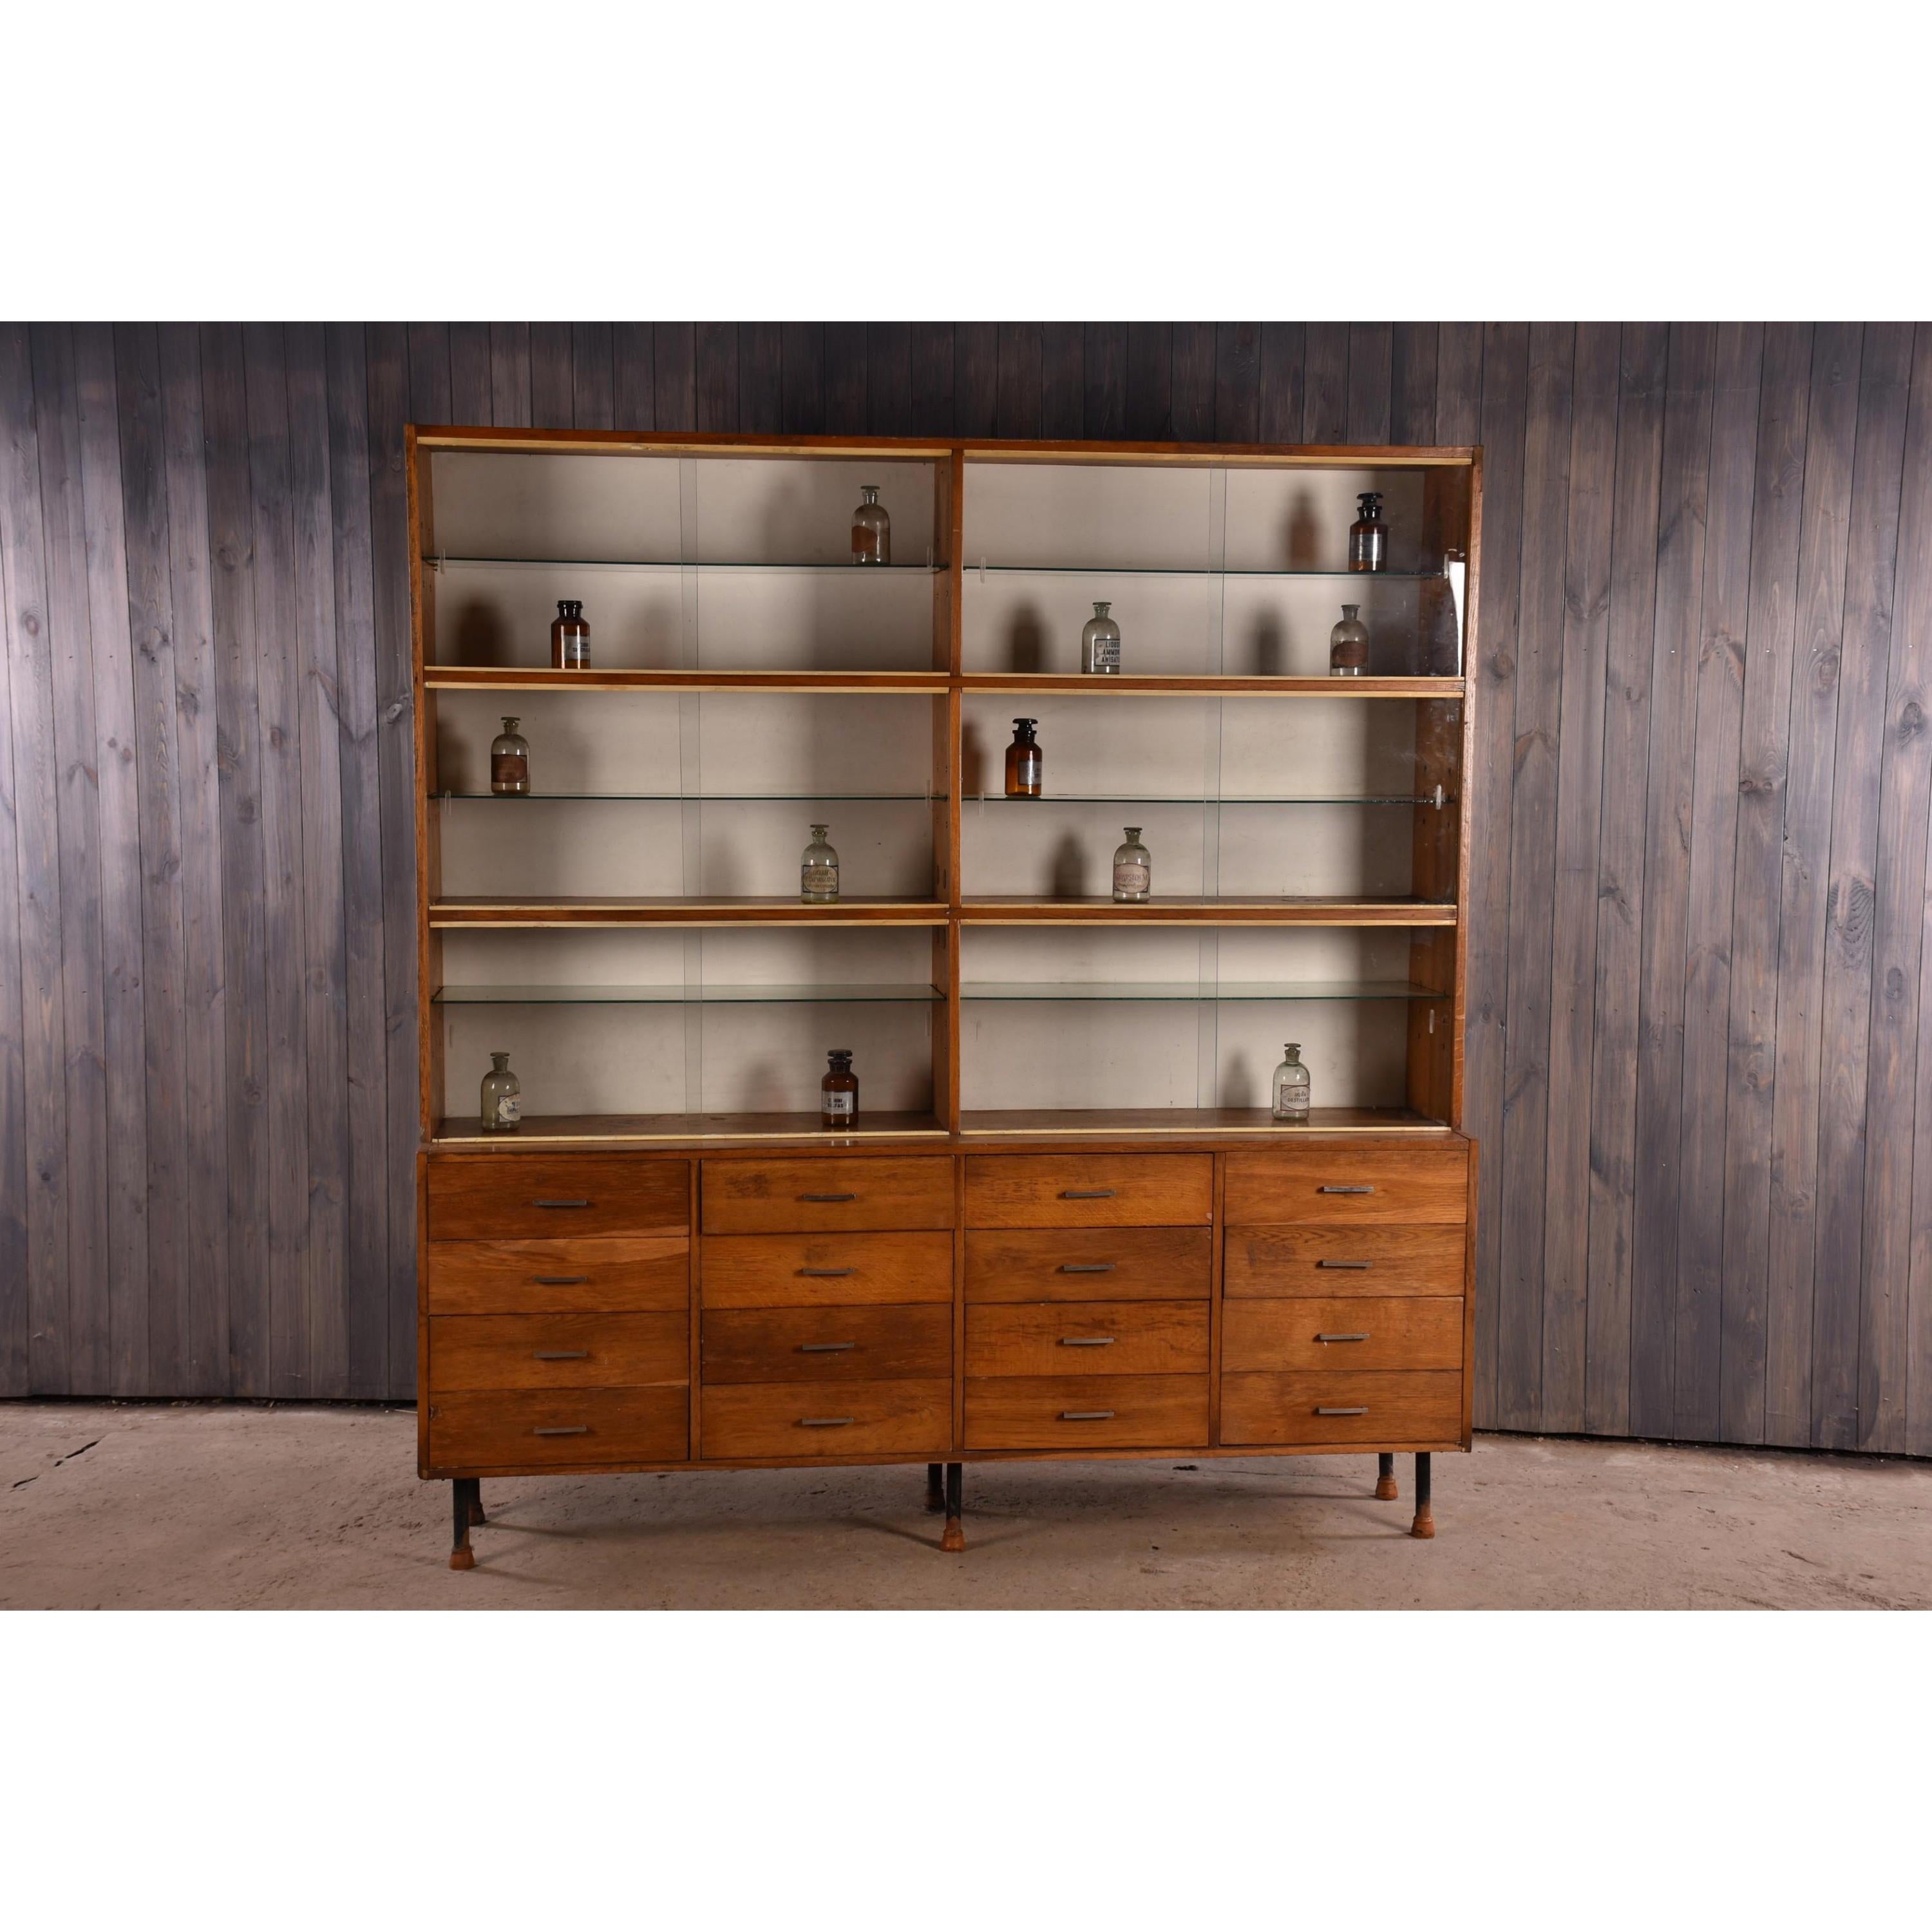 Apothecary Haberdashery Display Cabinet circa 1930s Number 11 1